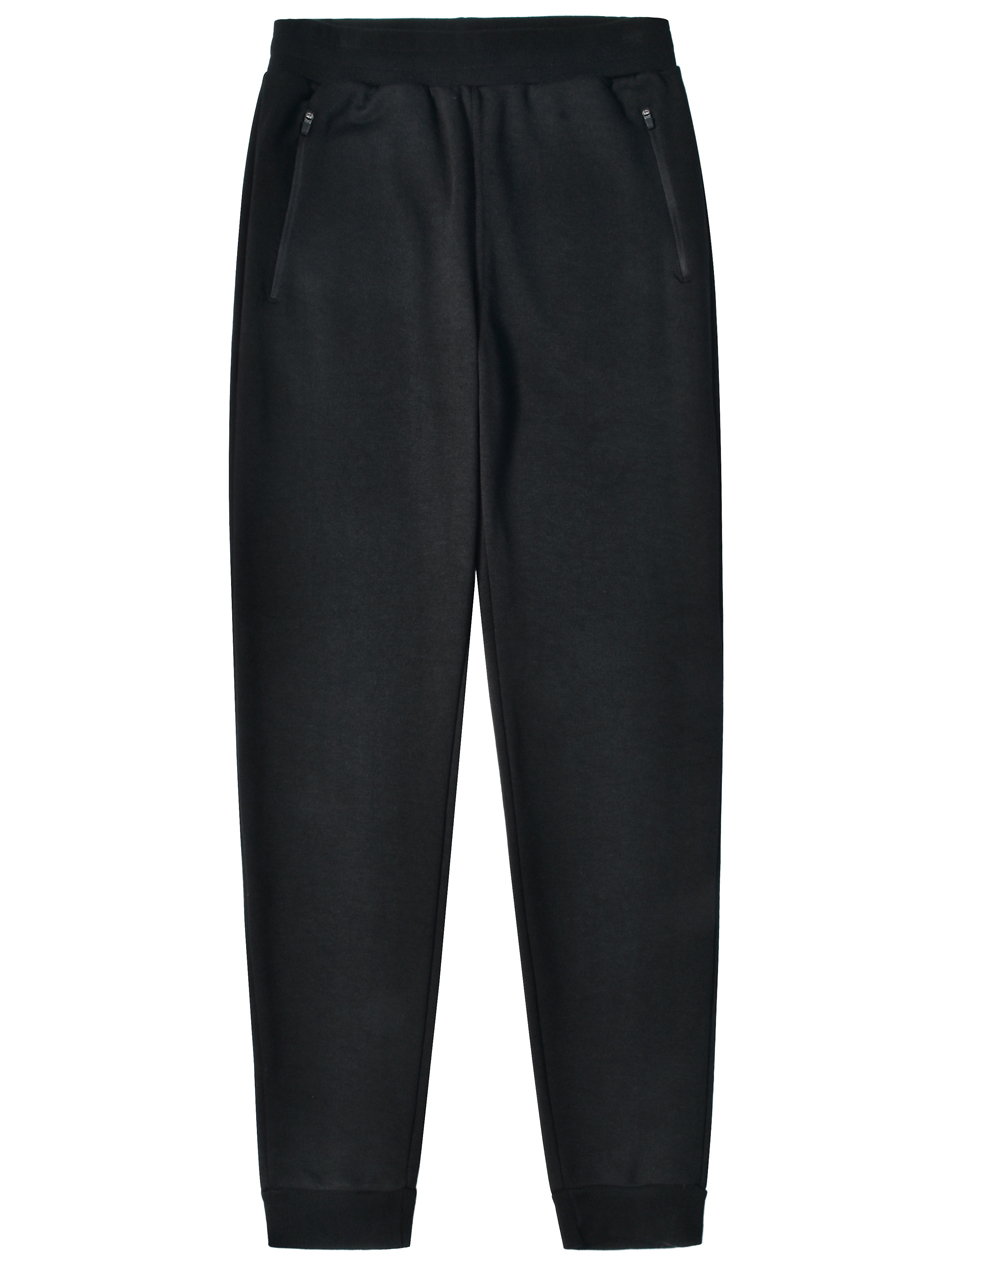 TP25/TP25K ADULTS & KIDS FRENCH TERRY TRACK PANTS - FCW